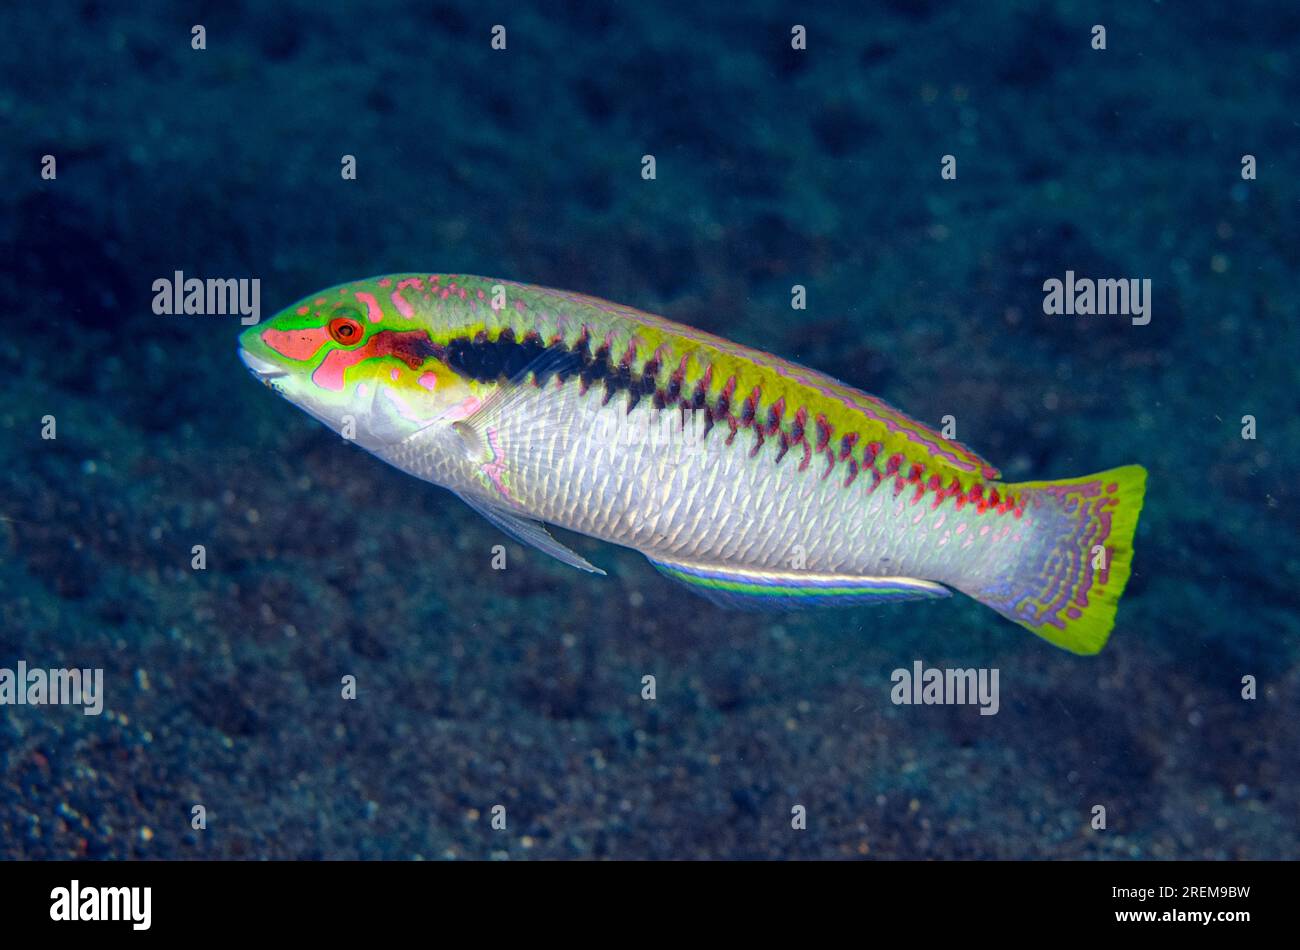 Zigzag Wrasse, Halichoeres scapularis, Amed Beach dive site, Amed, Bali, Indonesia, Indian Ocean Stock Photo